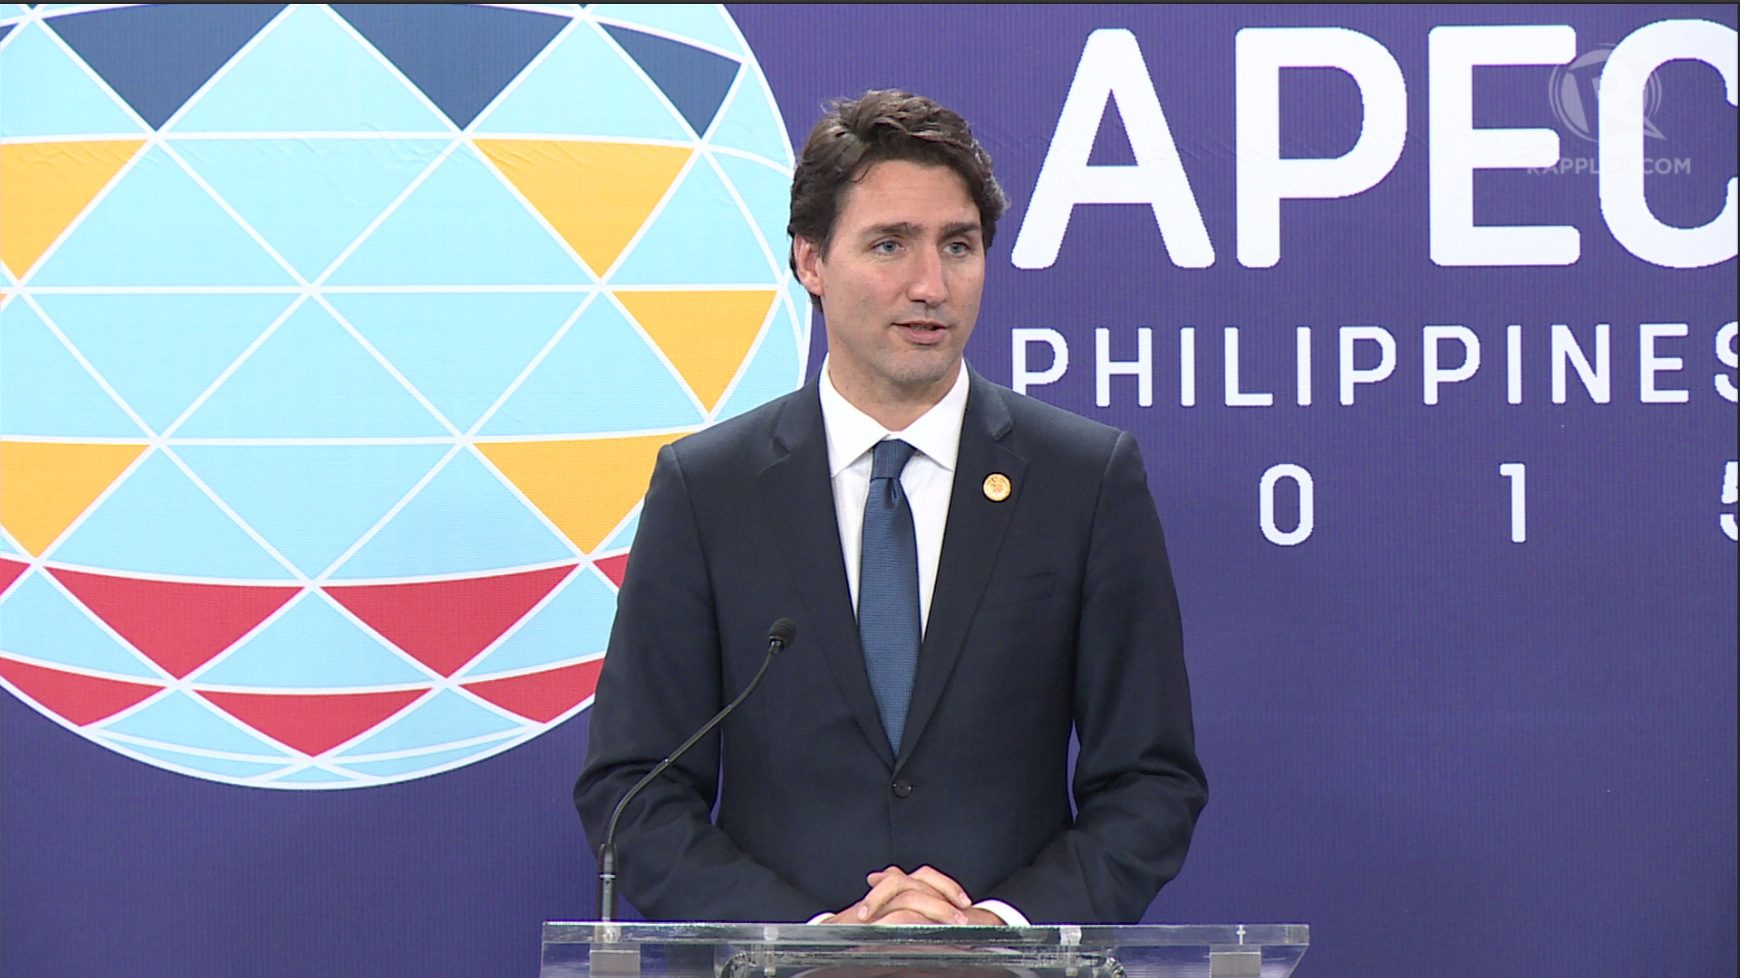 Frenzy over ‘APEC hottie’ Justin Trudeau at end of APEC meet